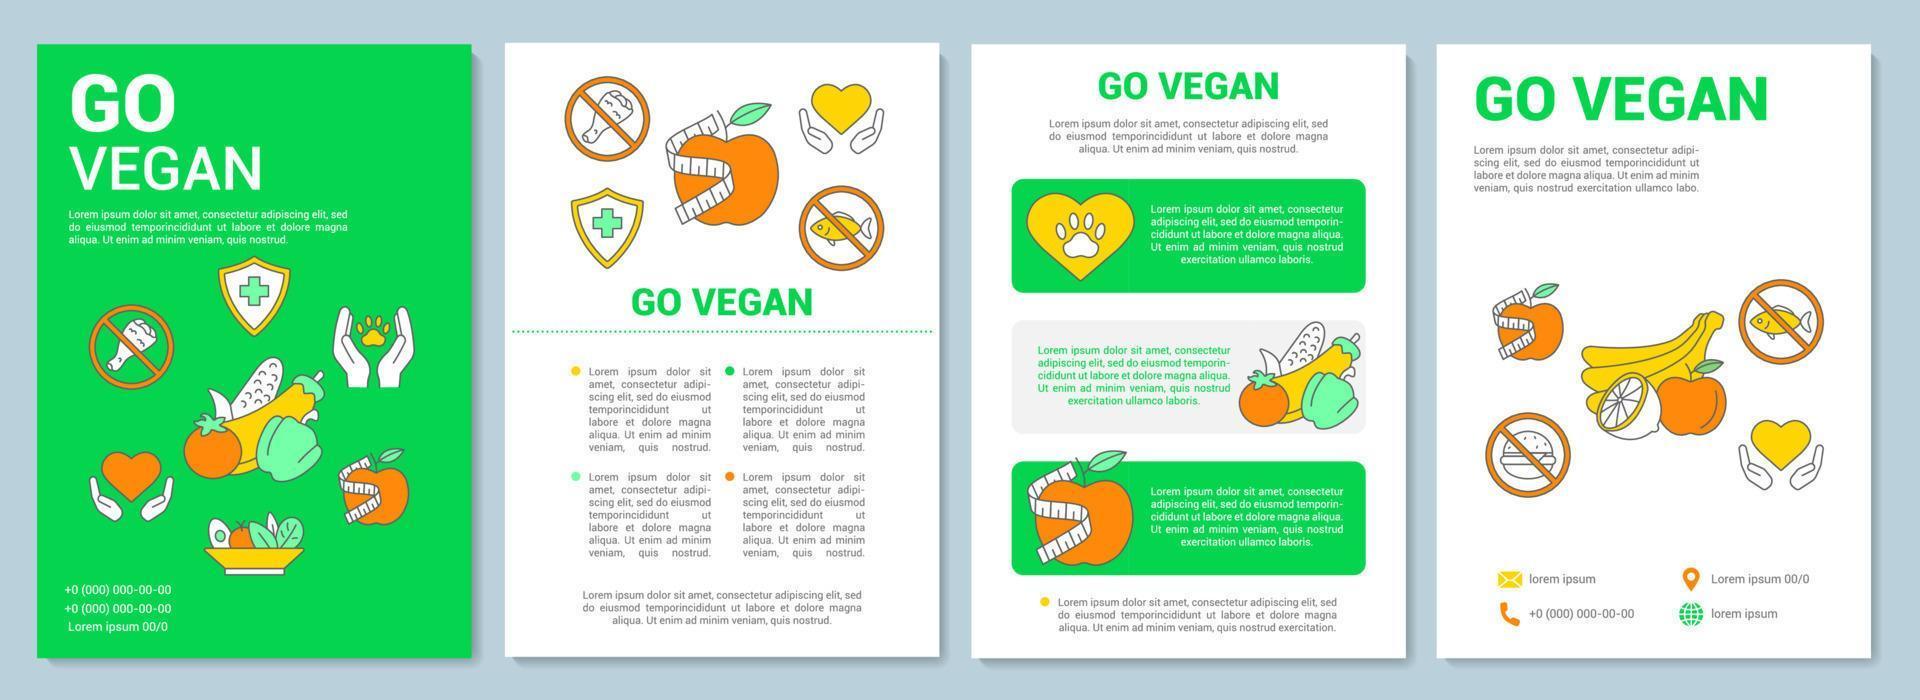 Vegetarian lifestyle brochure template layout. Go vegan flyer, booklet, leaflet print design with linear illustrations. Vector page layouts for magazines, annual reports, advertising posters